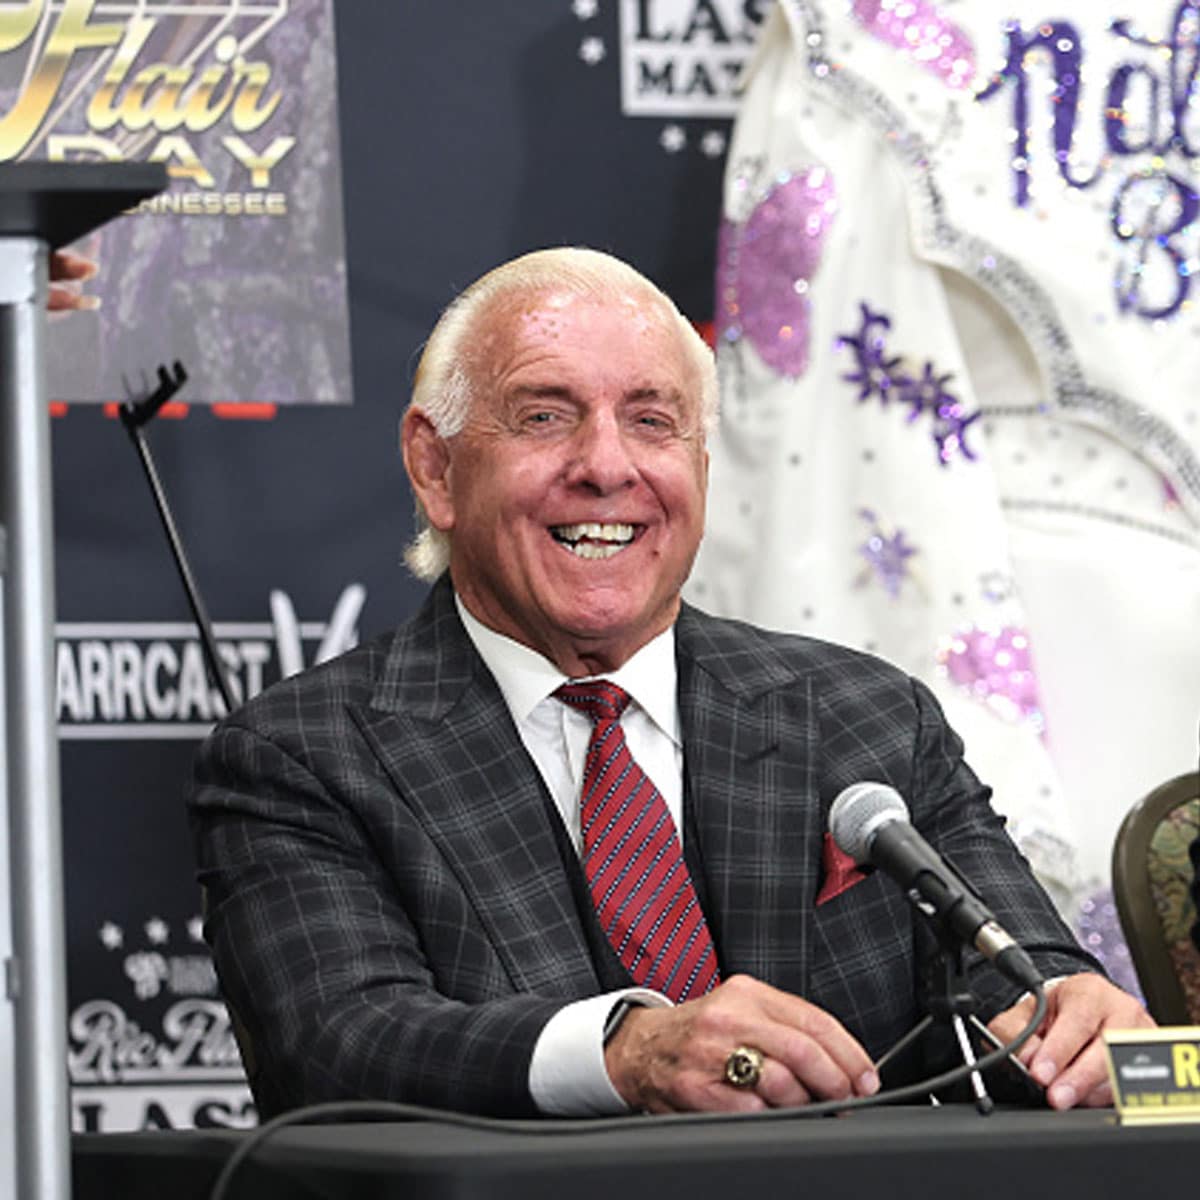 Ric Flair attends a press conference where July 31rst is declared “Ric Flair Day”